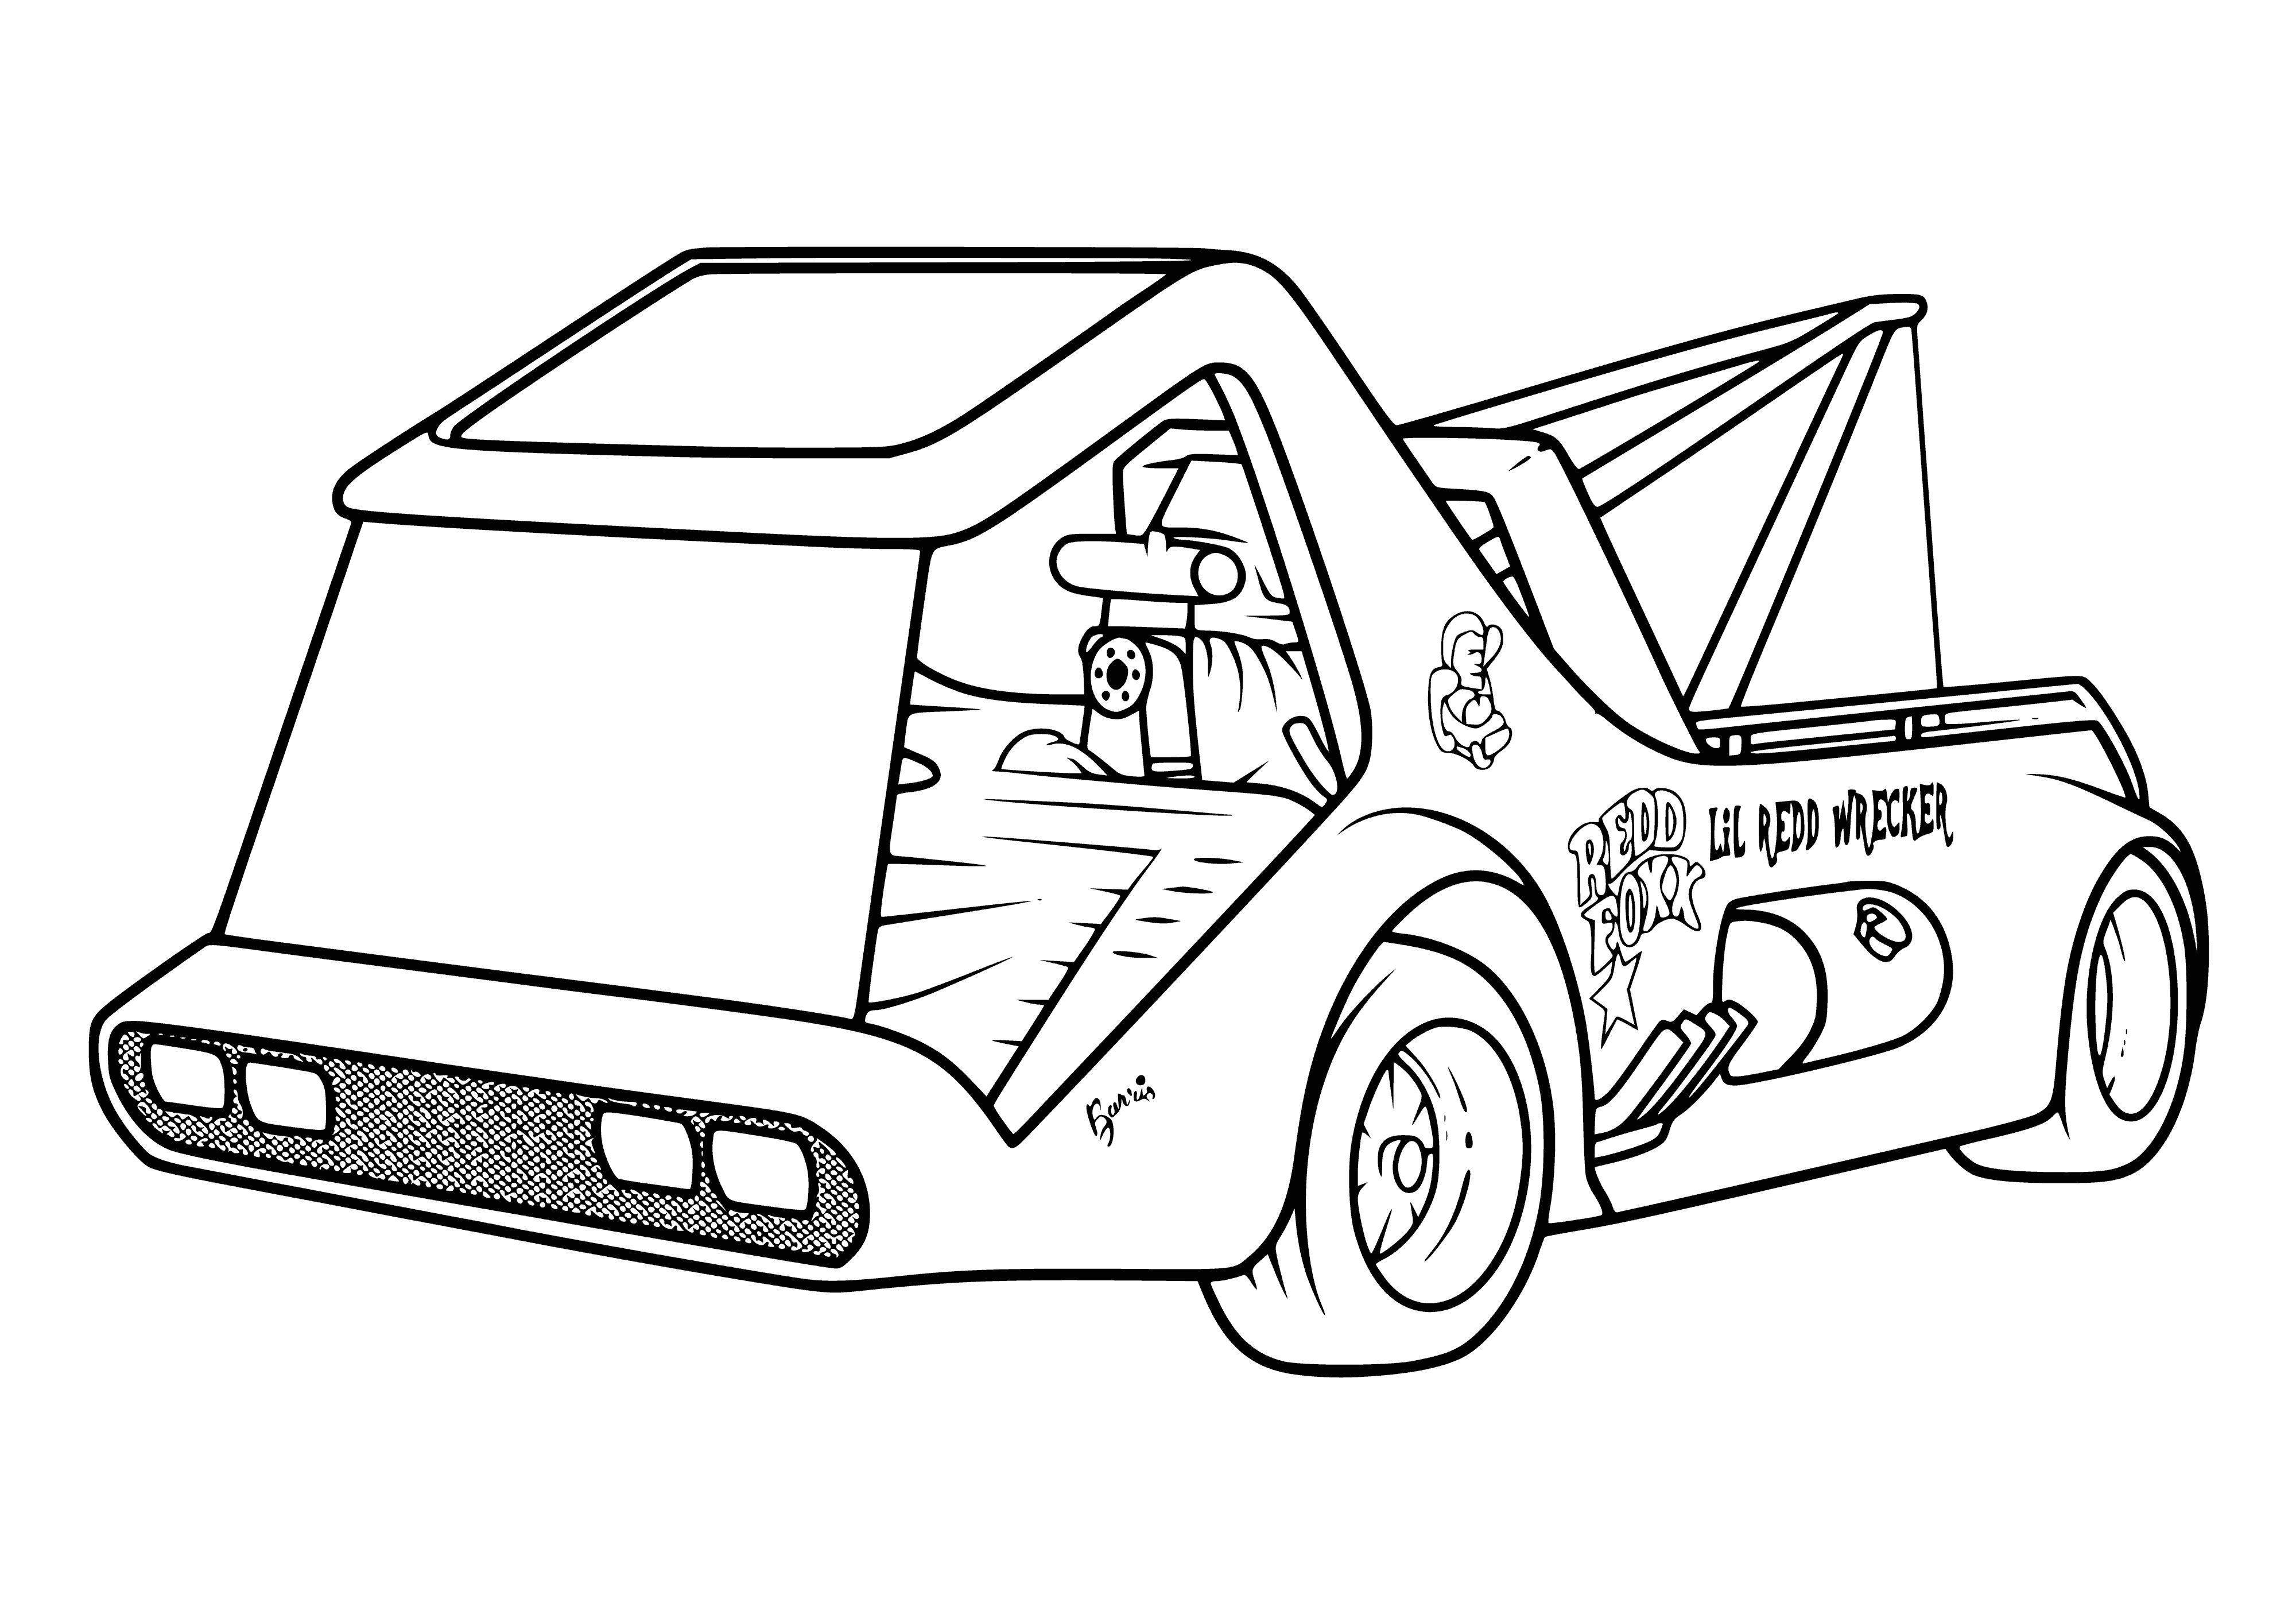 coloring page: Long, low car w/ sleek design; one large fin & two smaller ones on sides; front w/ 2 grilles & painted in metallic blue.